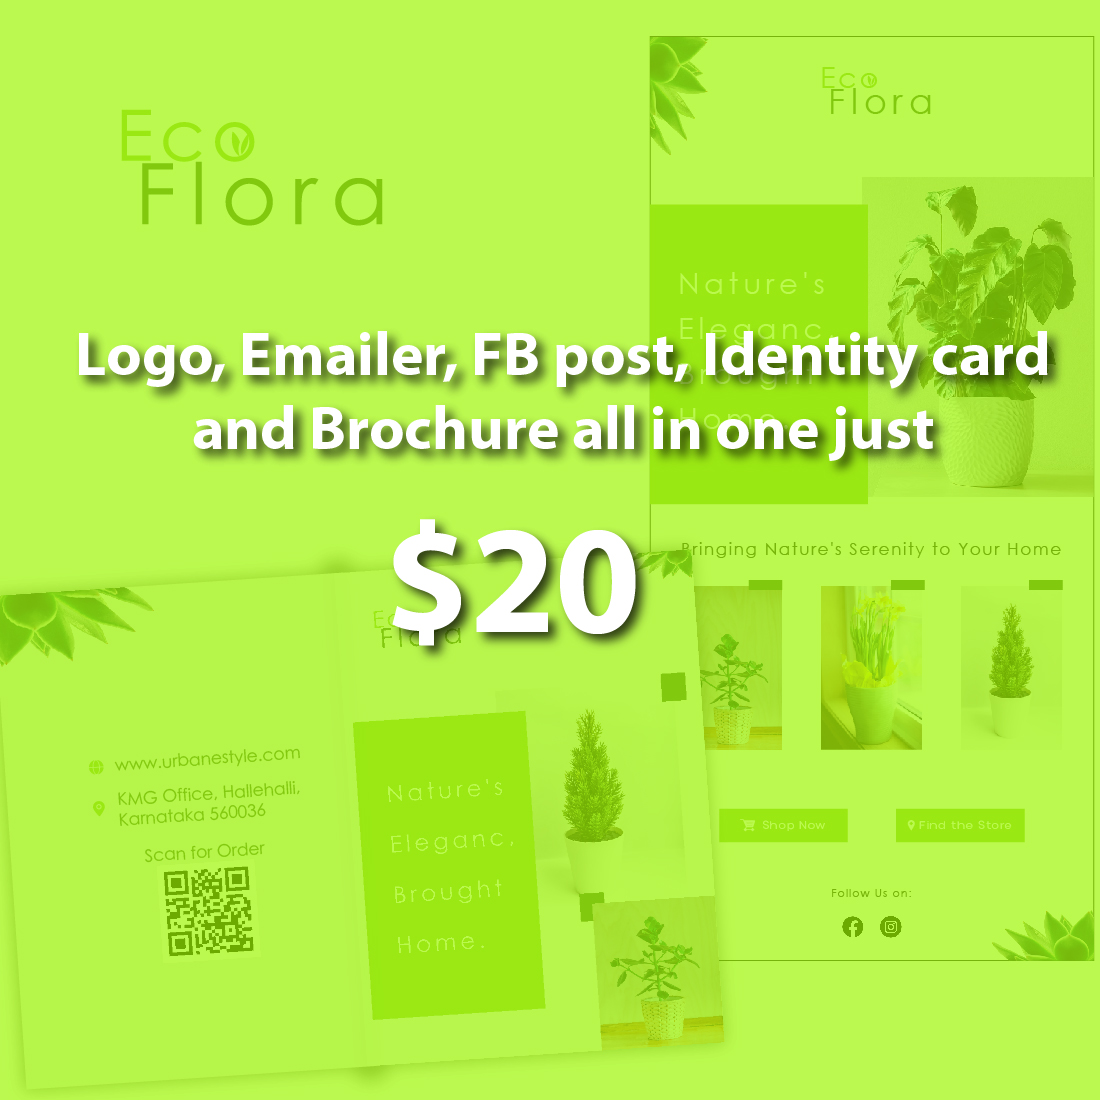 Logo, Emailer, FB post, Identity card and Brochure -only $20 cover image.